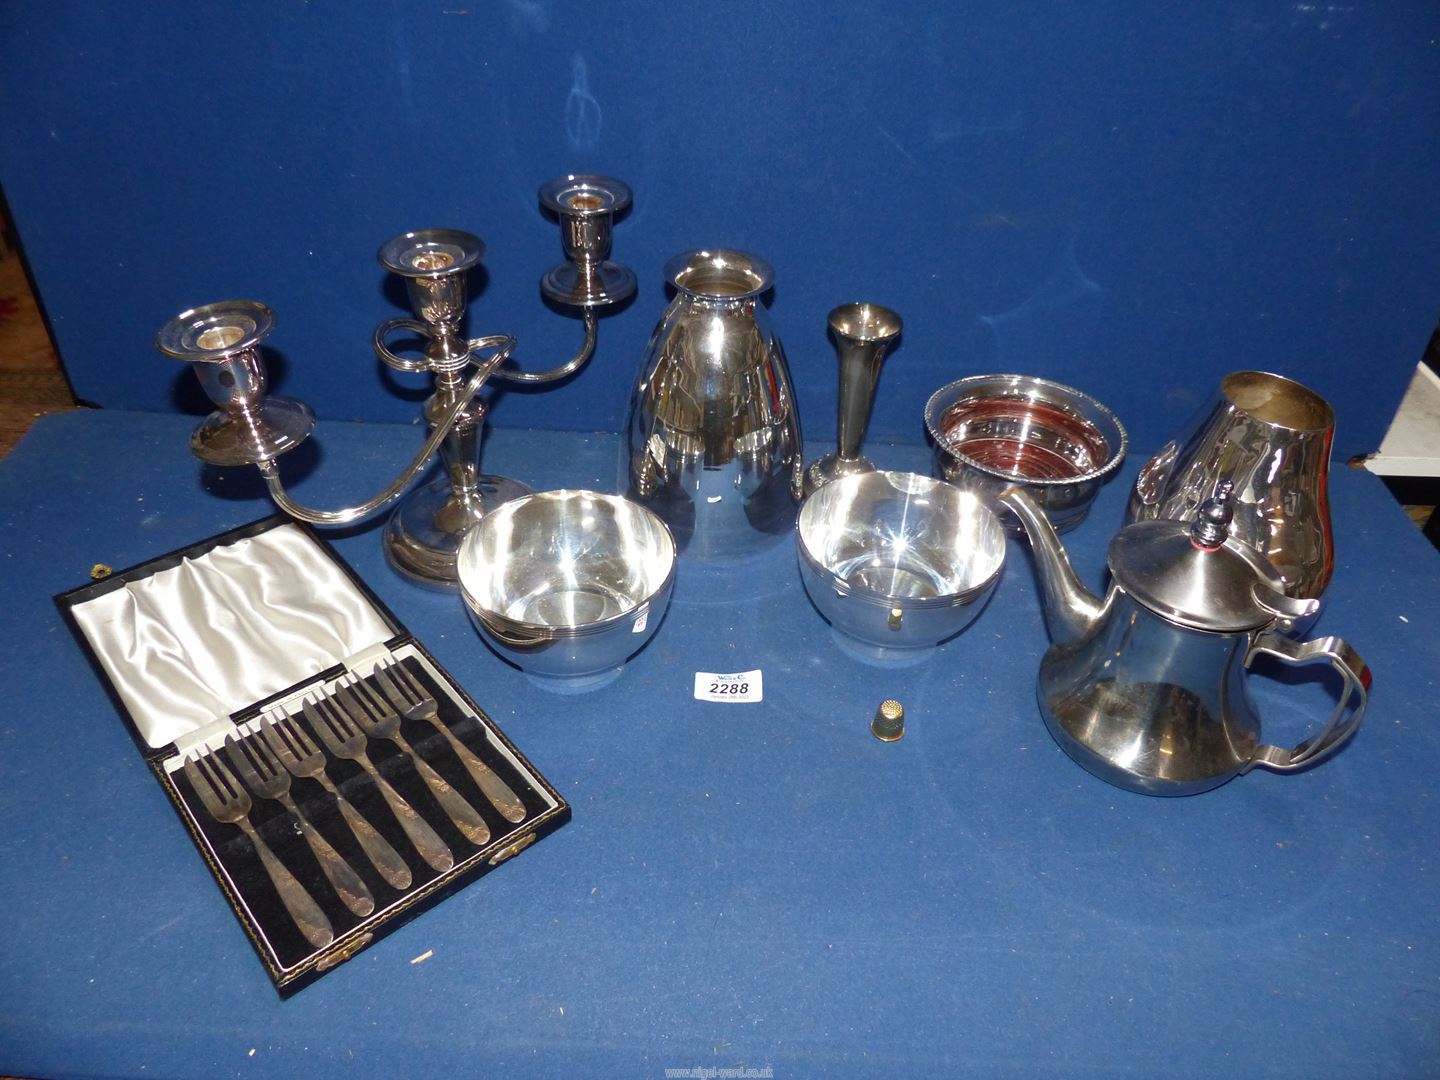 A small quantity of silver plate including candelabra, cased set of pastry forks, coaster, bud vase,